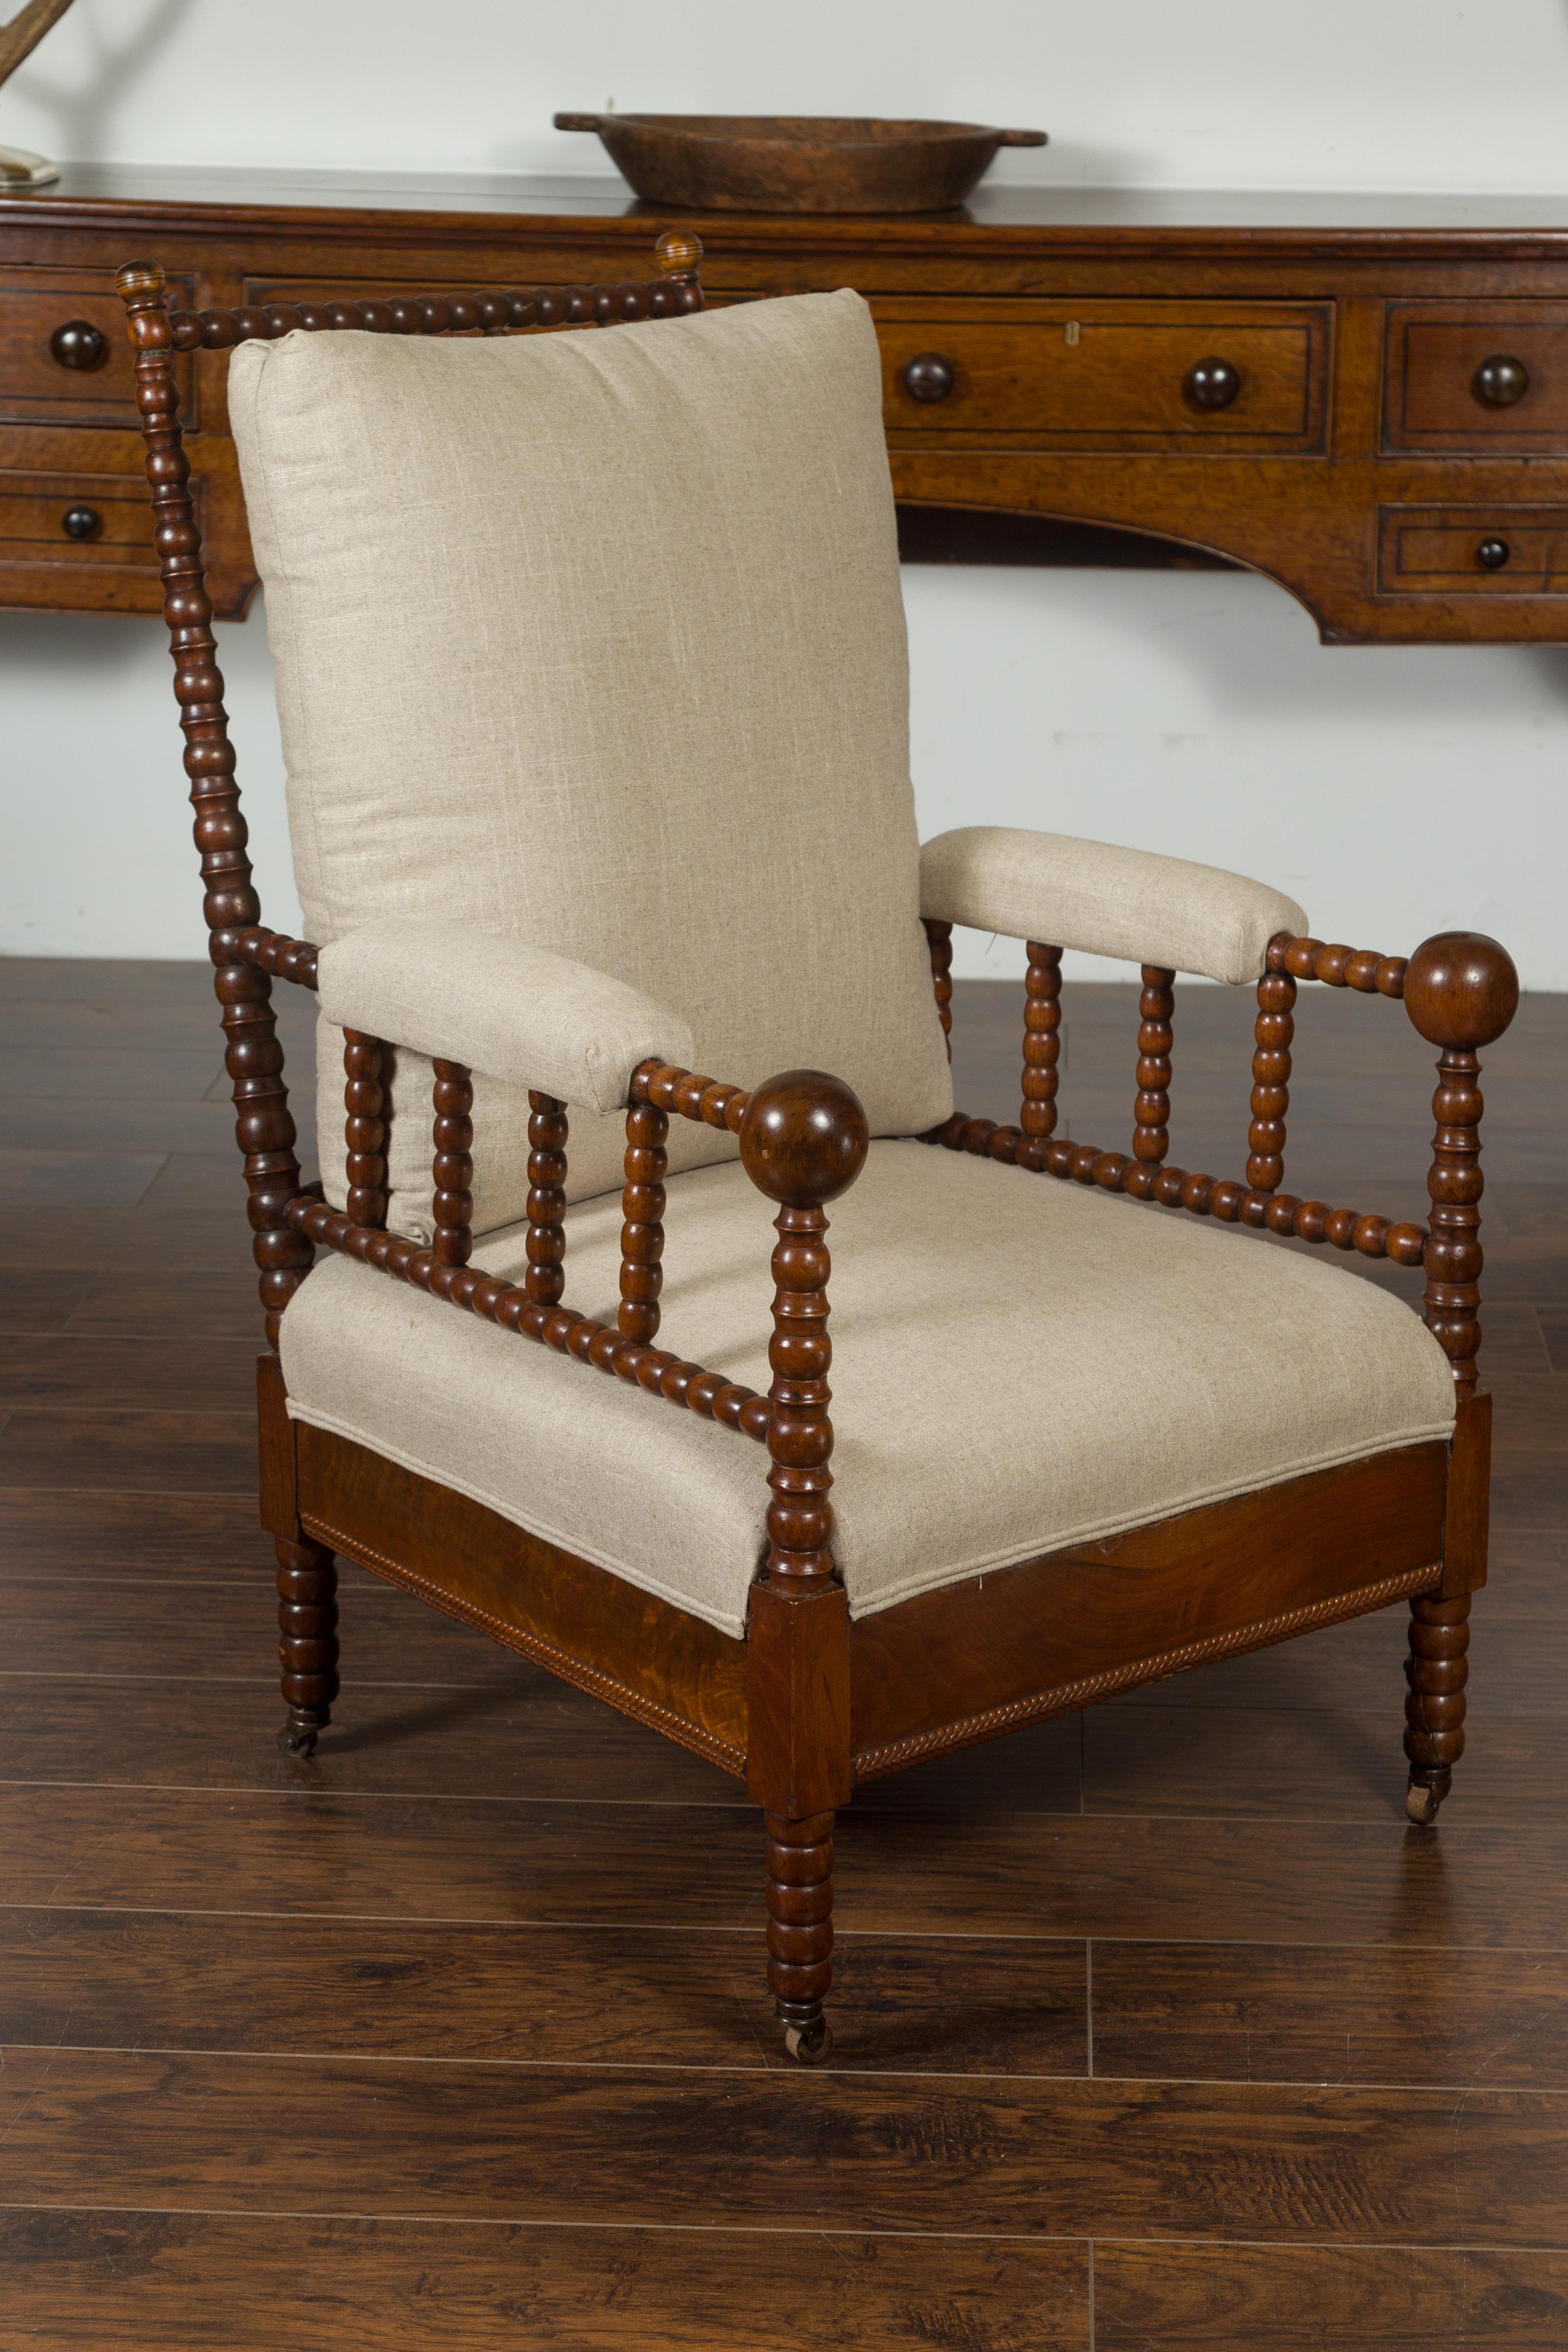 20th Century English Walnut Bobbin Armchair with New Upholstery and Casters, circa 1920